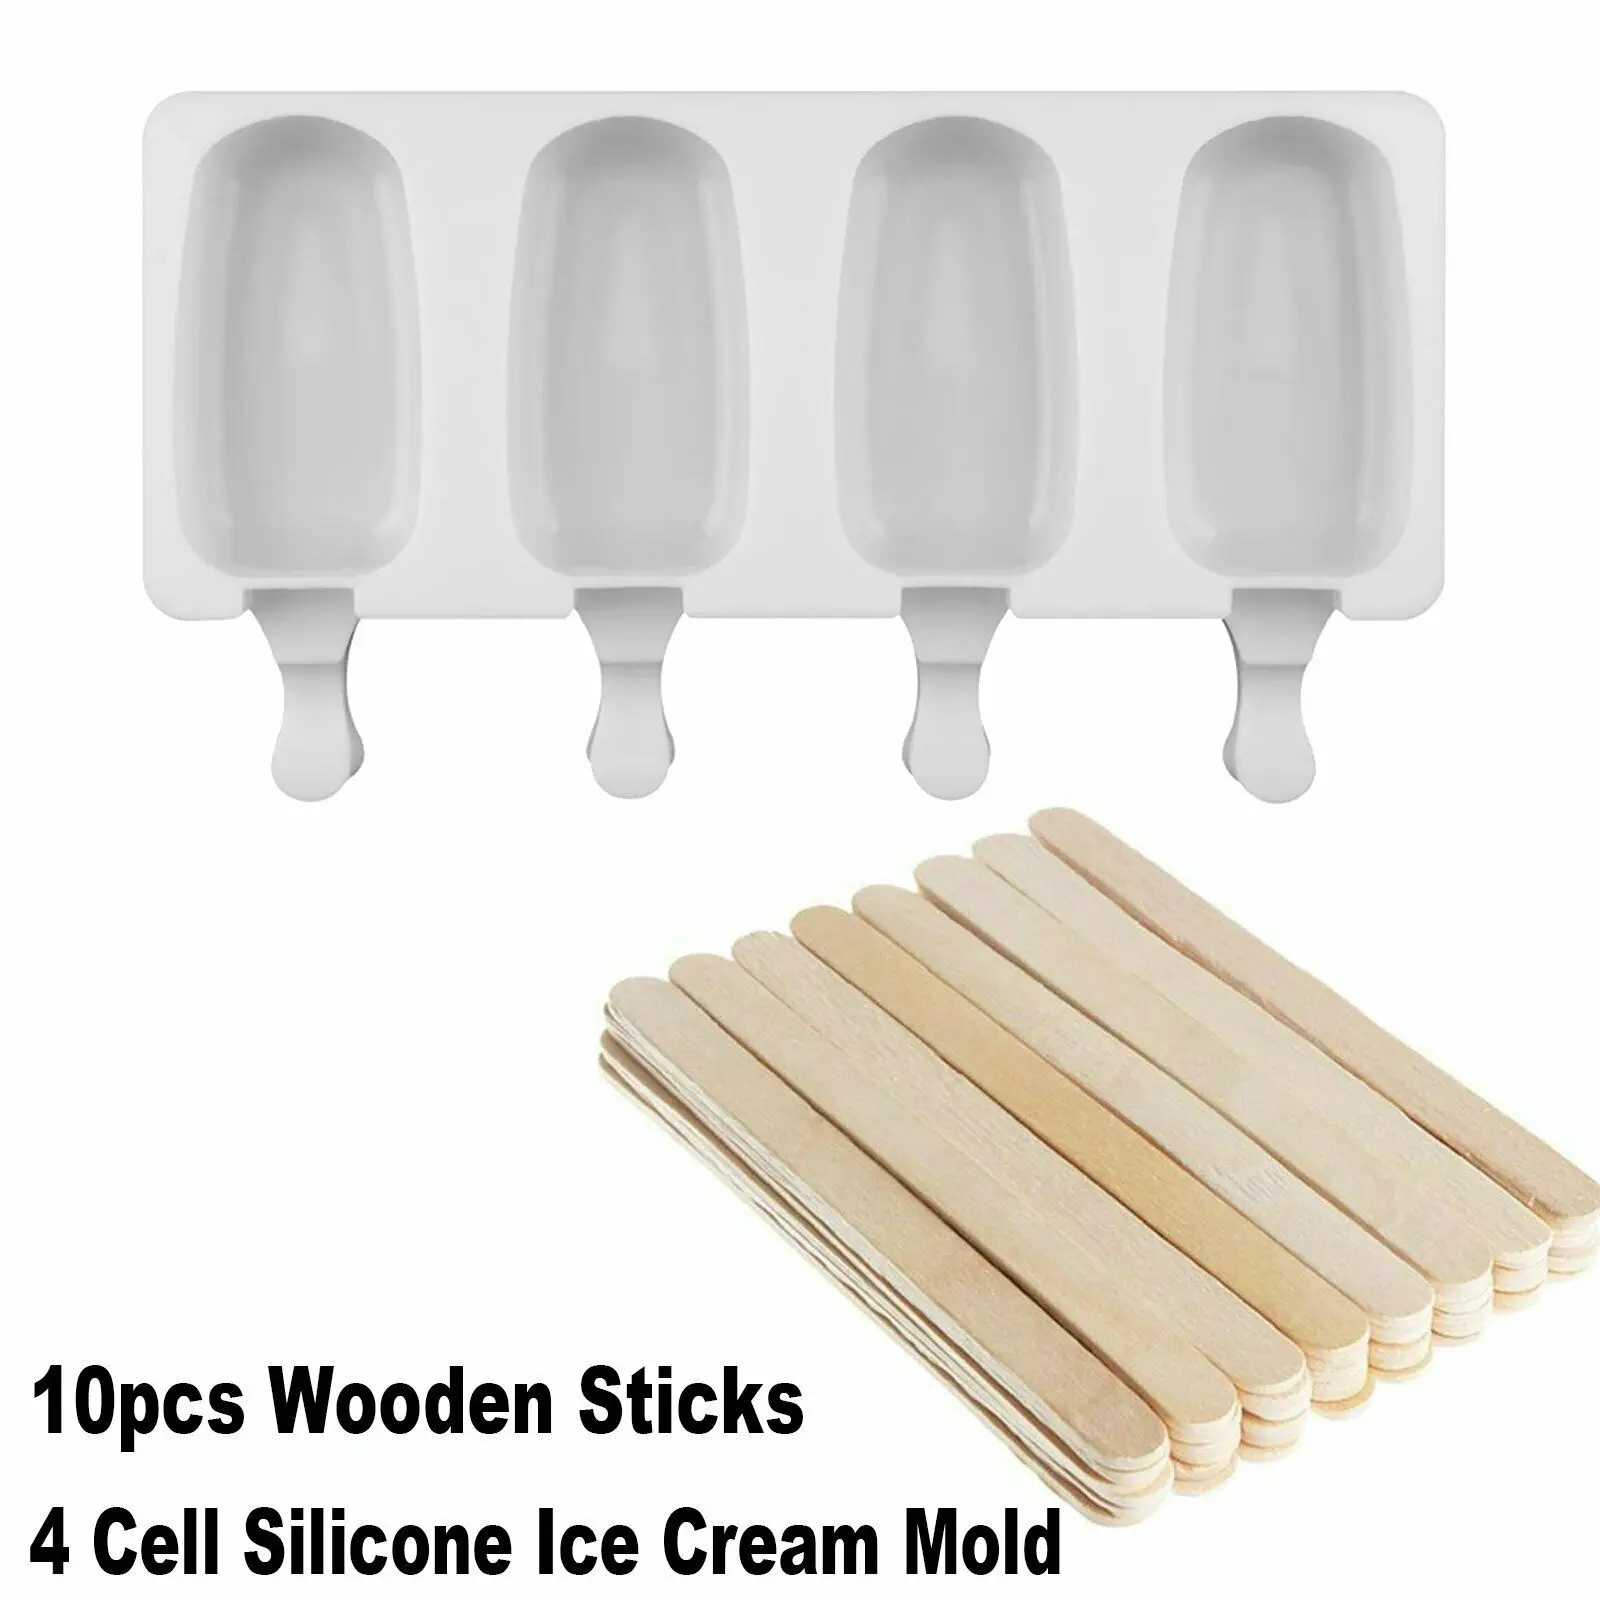 

4 Cell Silicone Frozen Ice Cream Mold Juice Popsicle Maker Ice Lolly Pop Mould